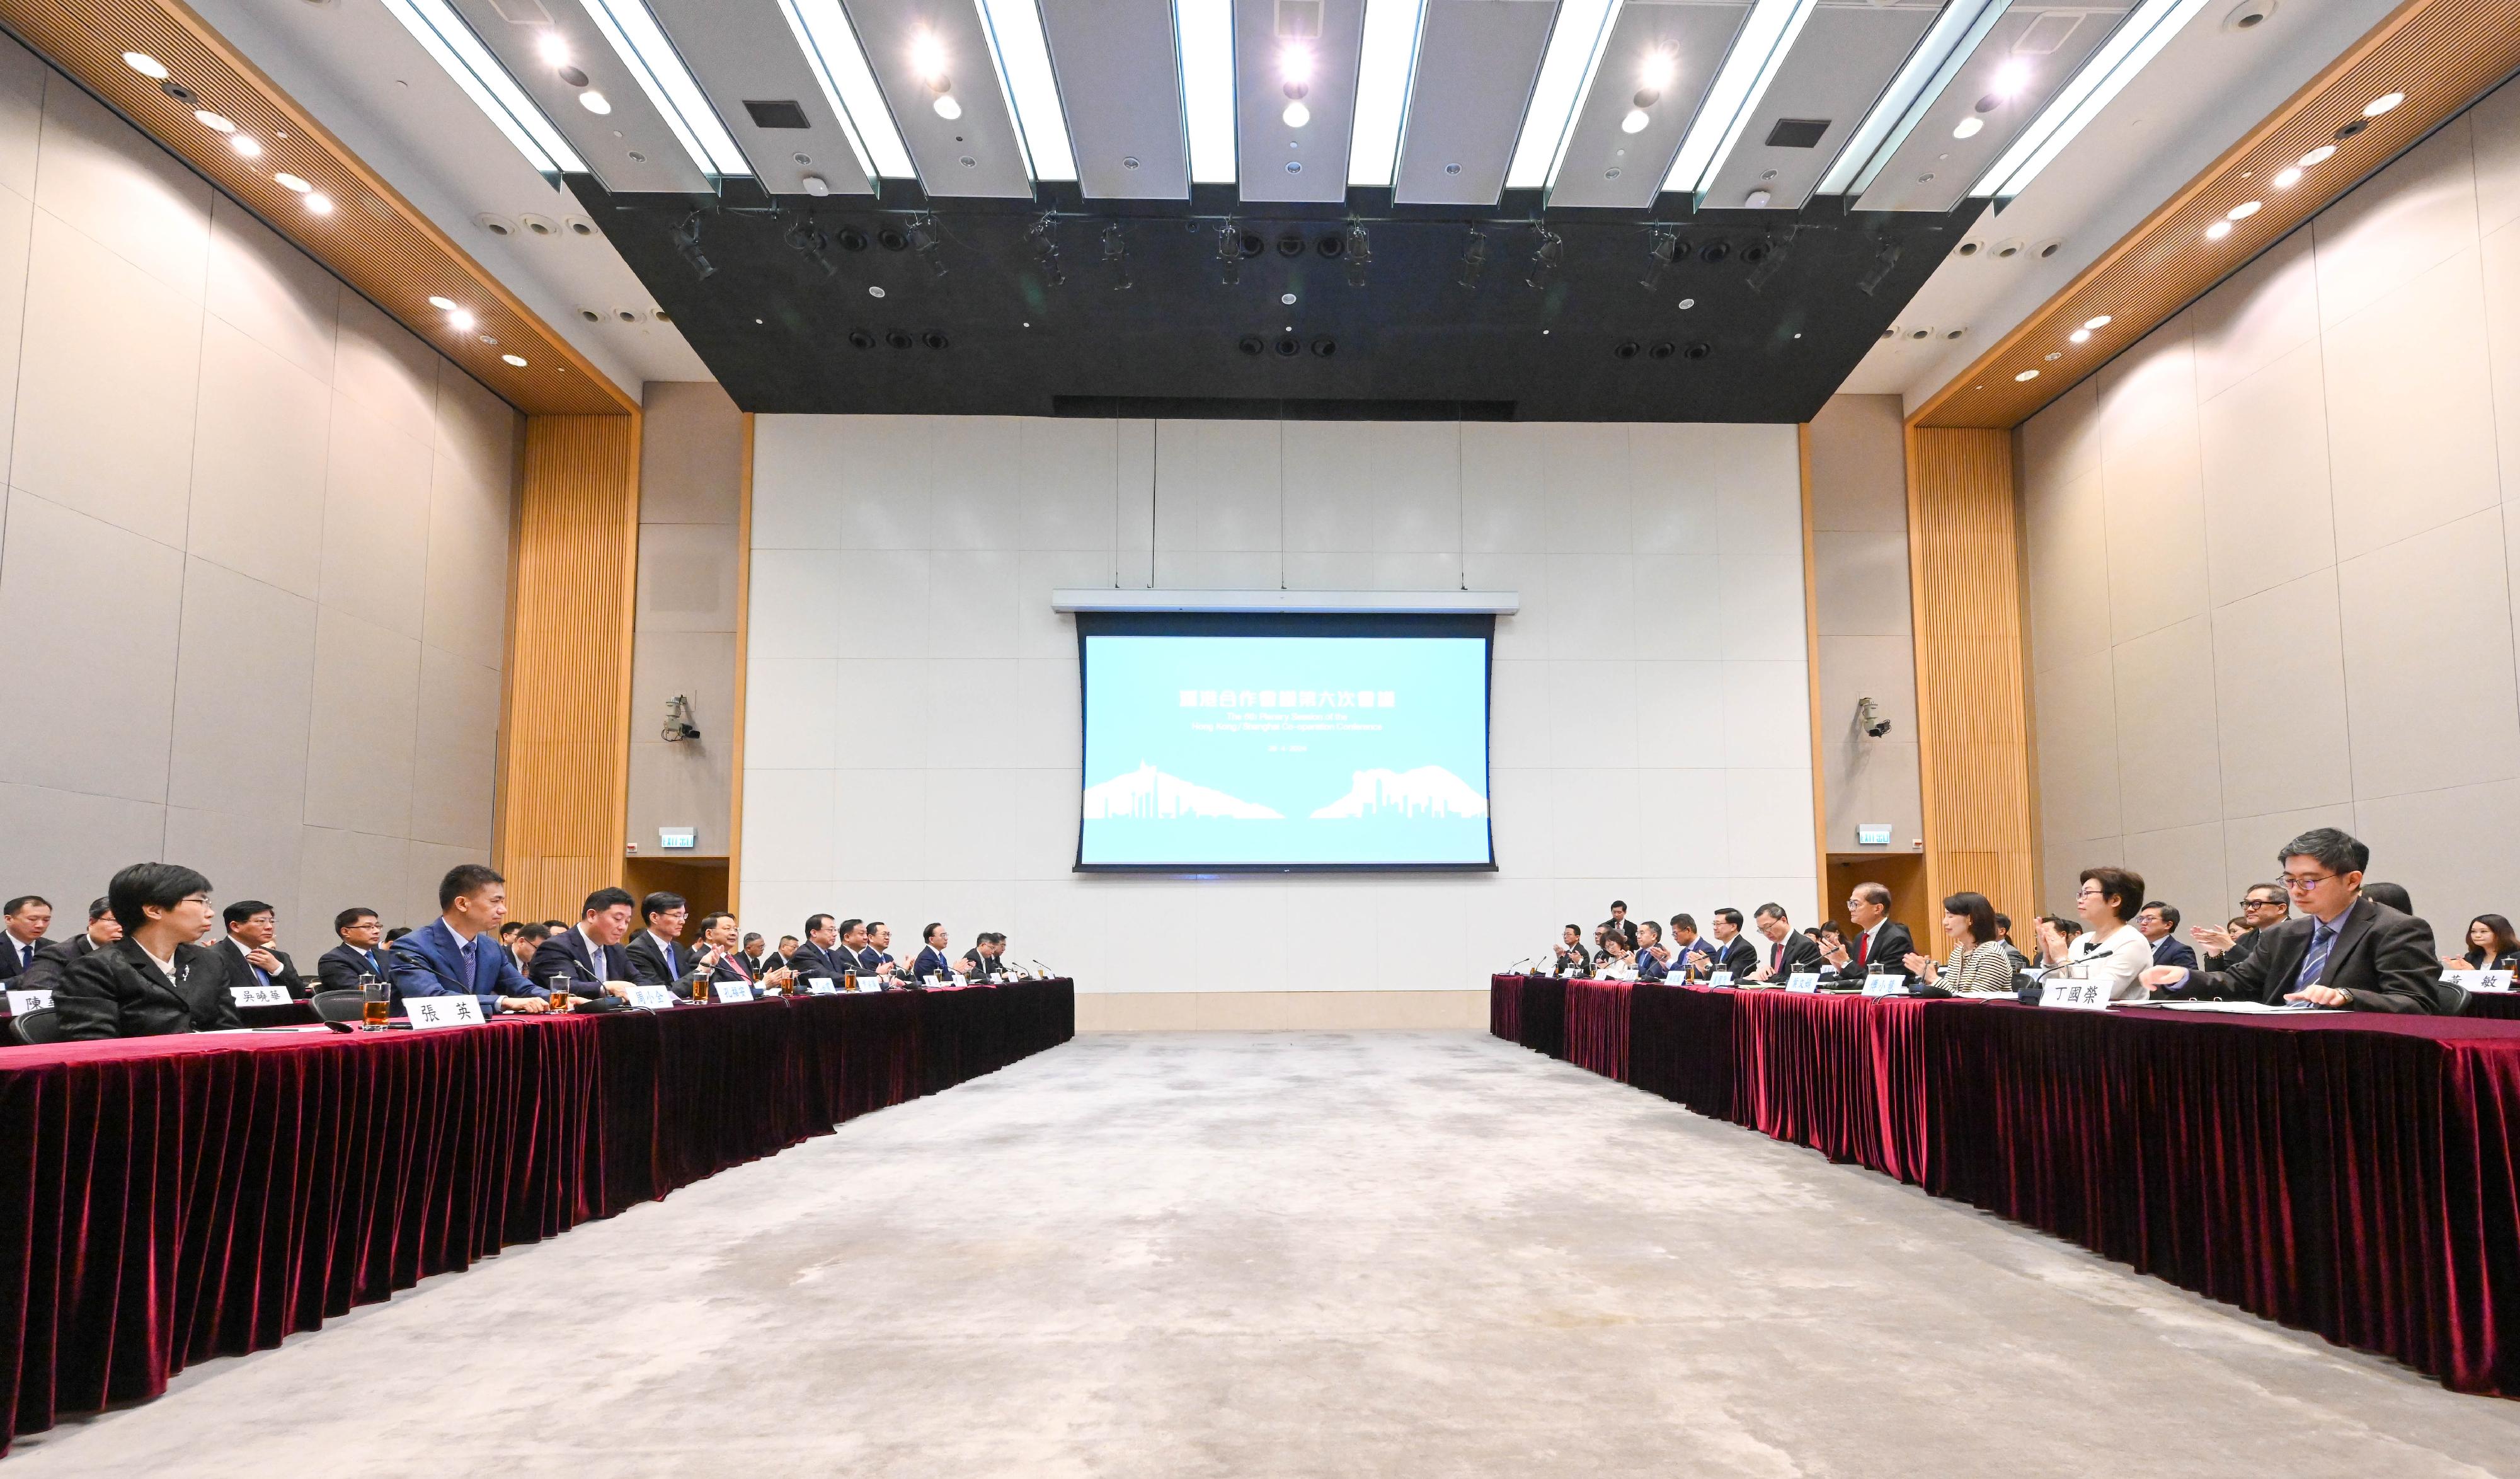 The Chief Executive, Mr John Lee, led a Hong Kong Special Administrative Region Government delegation to attend the 6th Plenary Session of the Hong Kong/Shanghai Co-operation Conference in the Central Government Offices today (April 26). Photo shows Mr Lee (sixth right) and the Mayor of Shanghai, Mr Gong Zheng (sixth left), co-chairing the Plenary. Also joining the meeting were the Financial Secretary, Mr Paul Chan (seventh right), the Secretary for Justice, Mr Paul Lam, SC (fifth right), and other officials from both sides.
